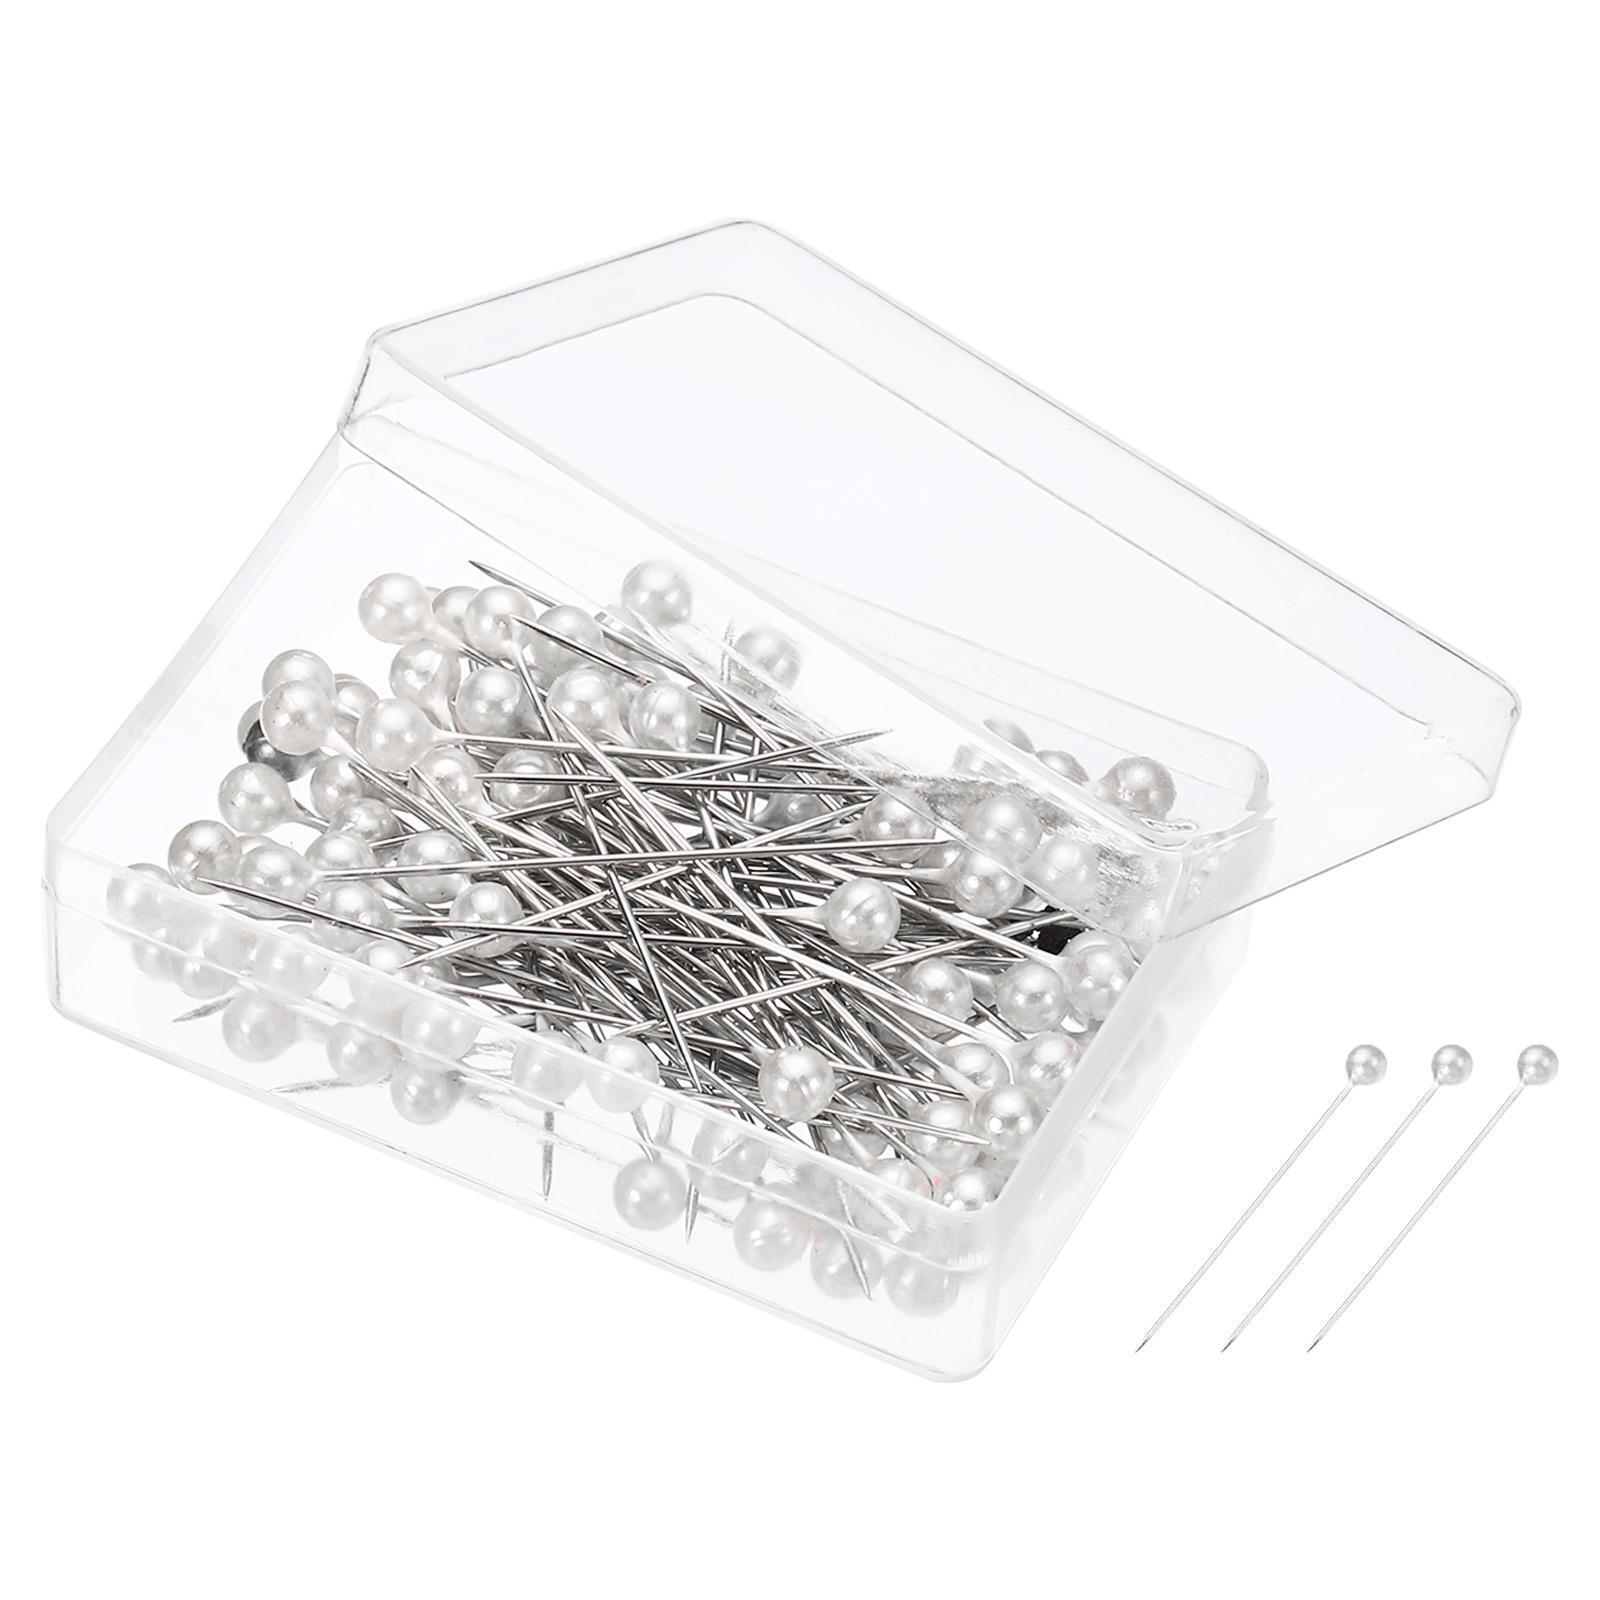 1 Set Pearlized Sewing Pins, Ball Head Needle Straight Quilting Pin, White